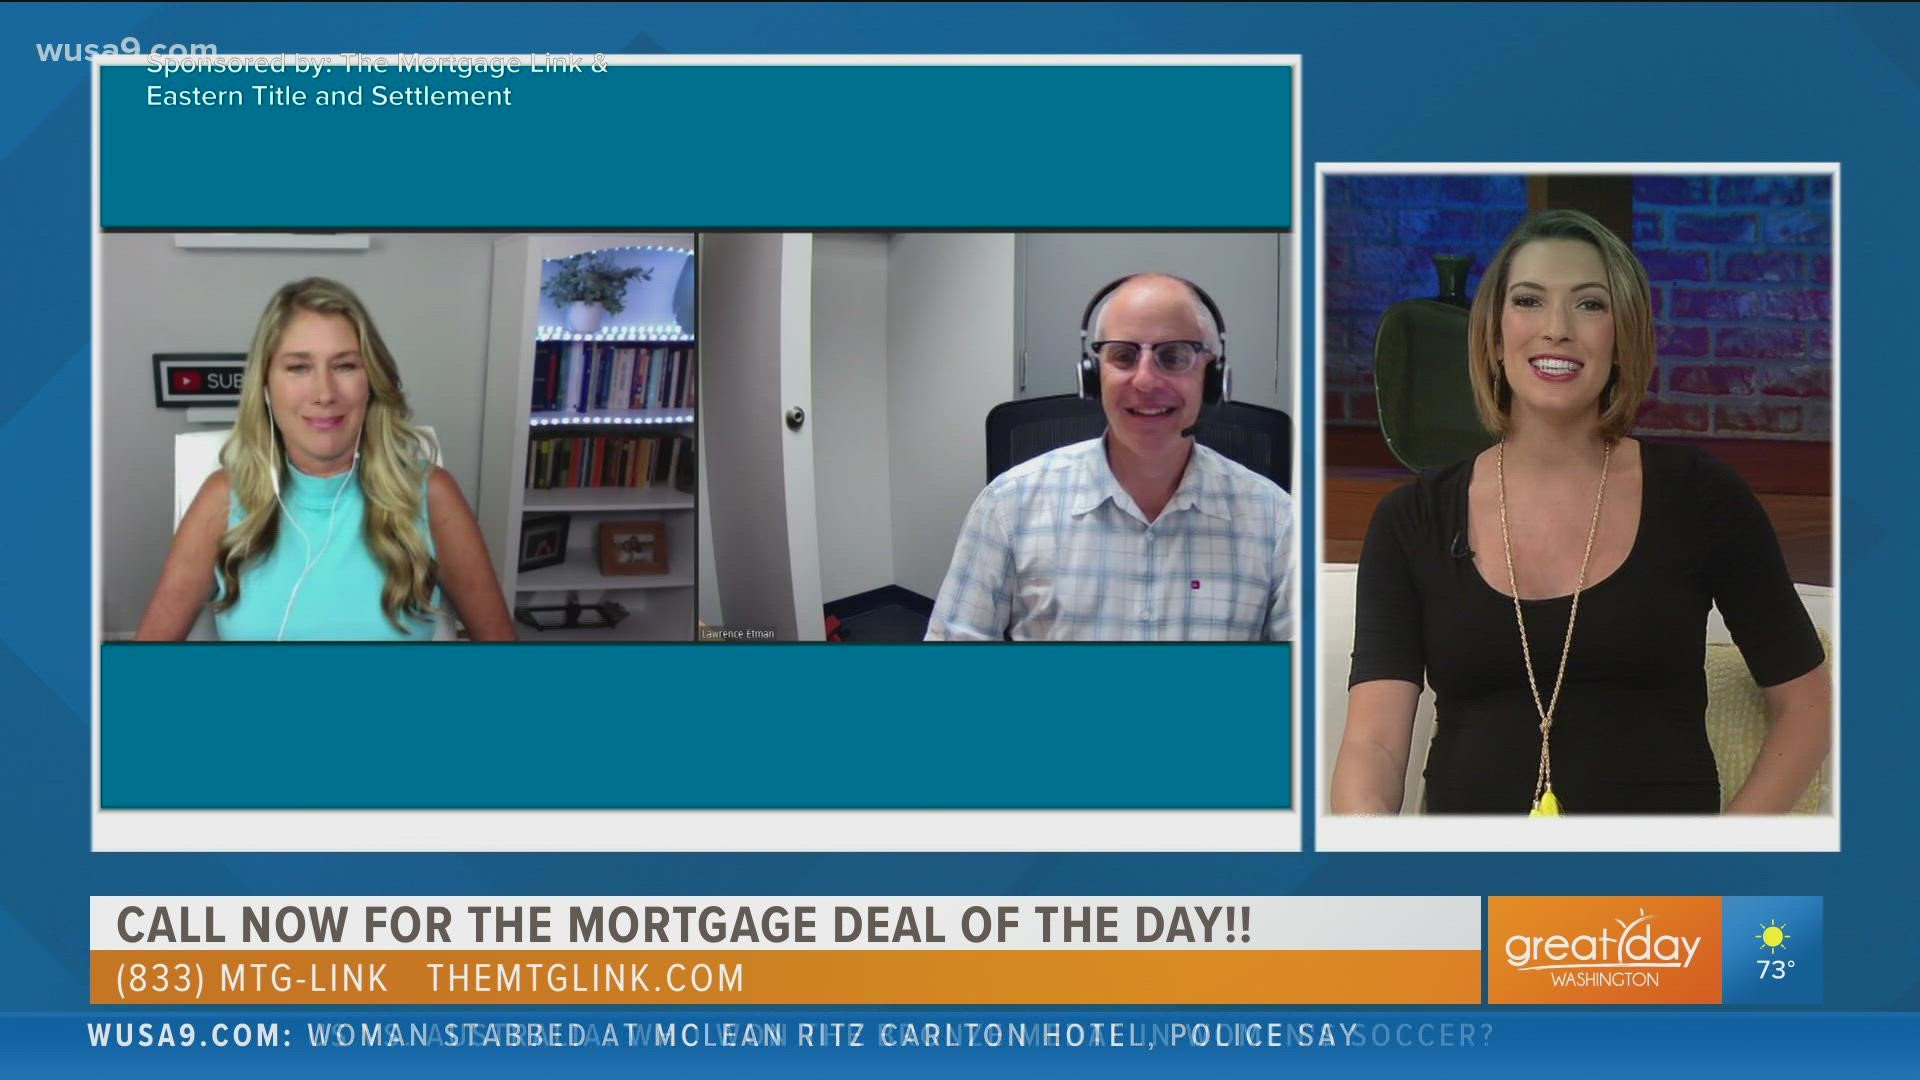 Larry Etman and Caryn Krooth Gardiner talk about the current real estate market trends. Sponsored by Real Estate Top Performers and The Mortgage Link.